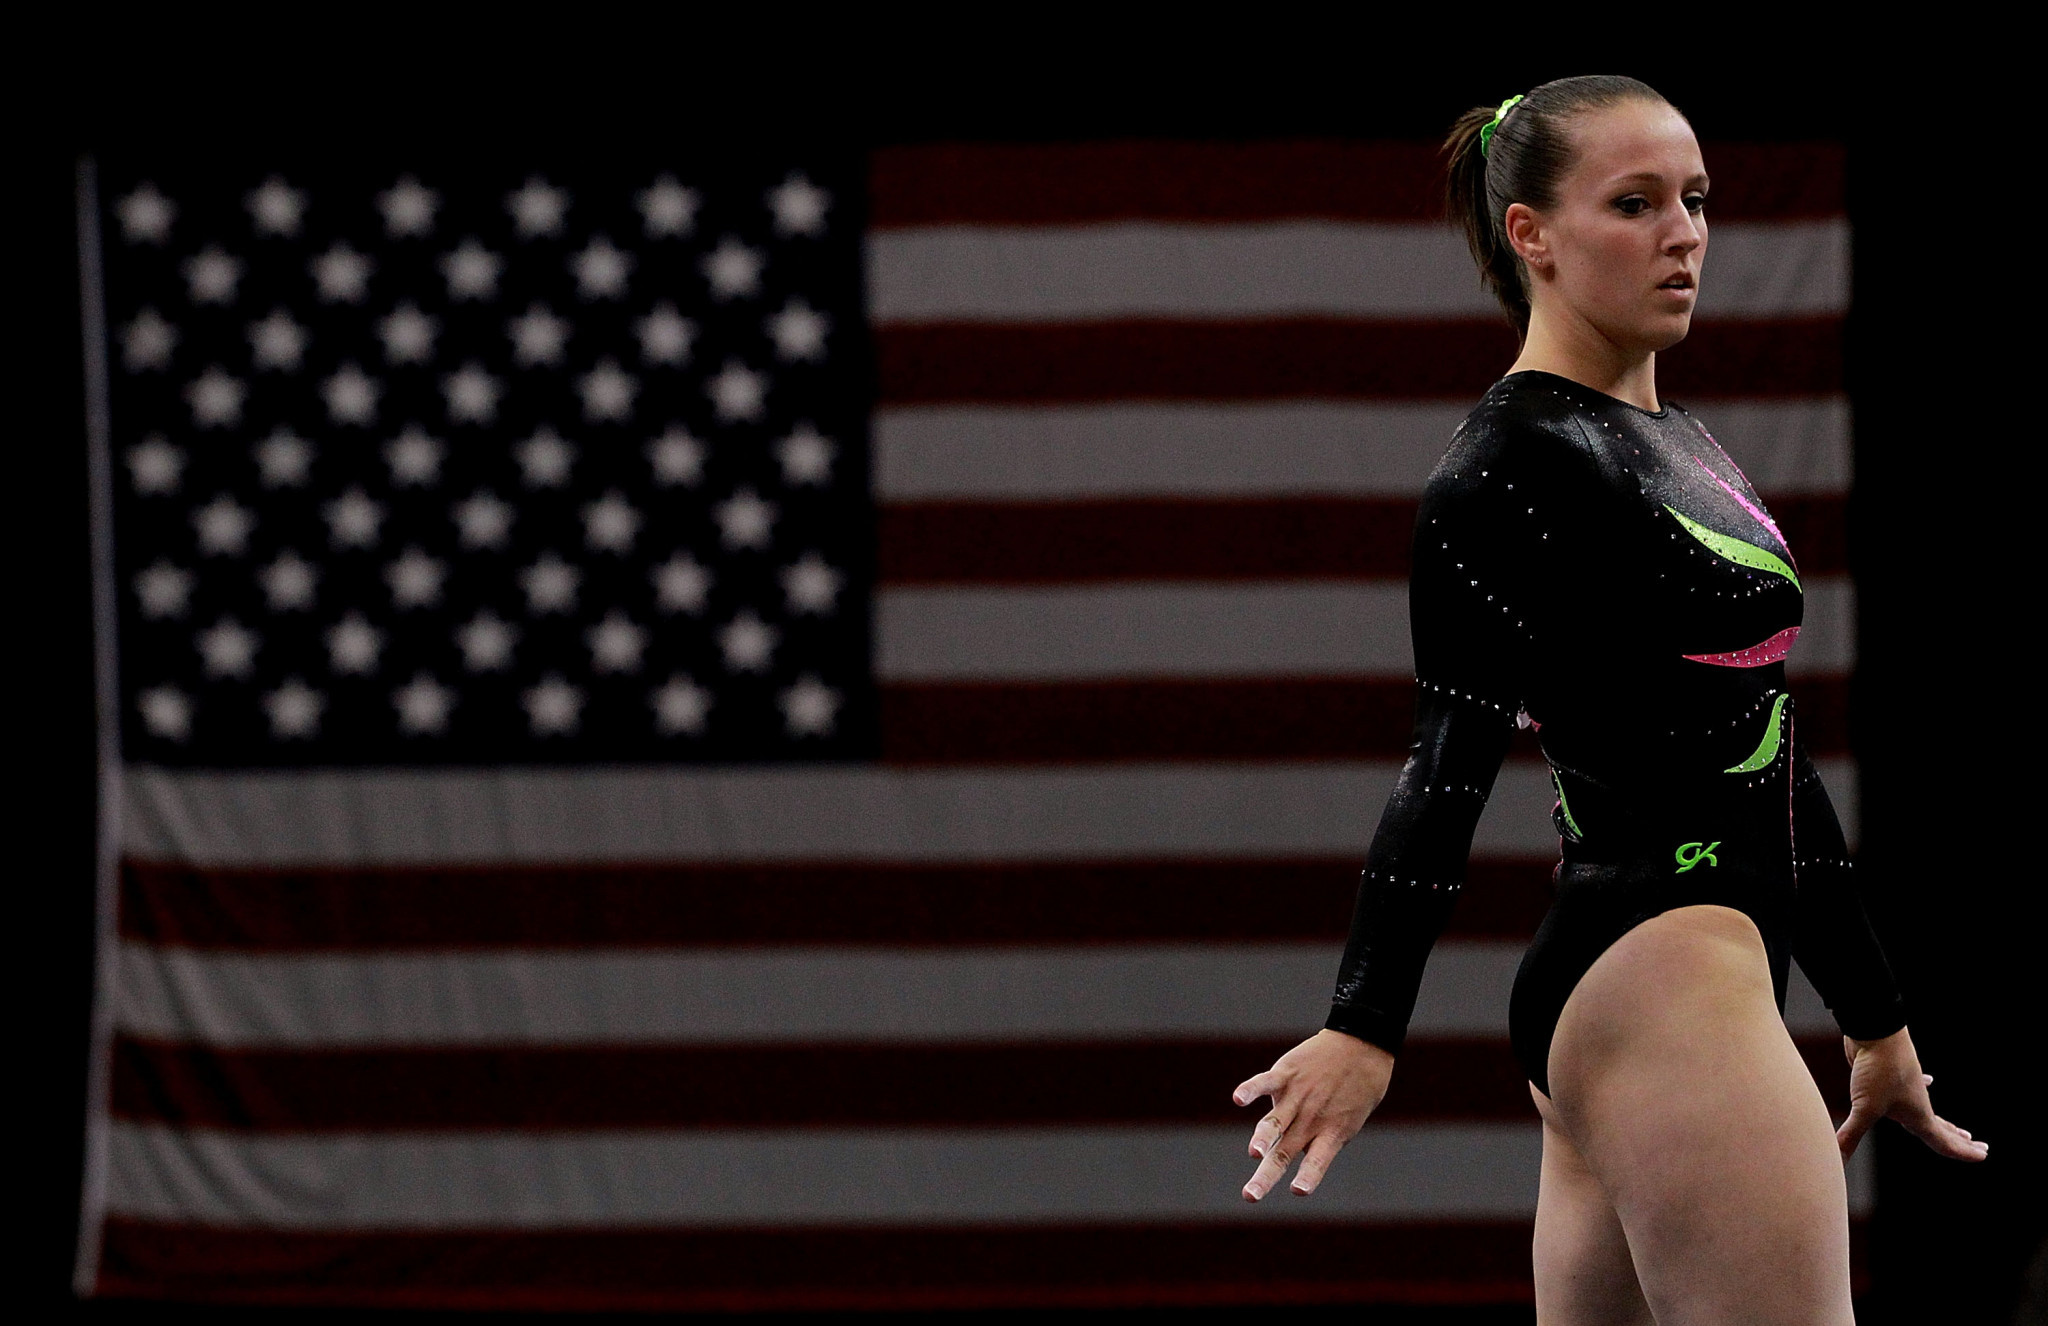 Former world champion gymnast Chellsie Memmel could compete at next year's Olympics in Tokyo ©Getty Images 